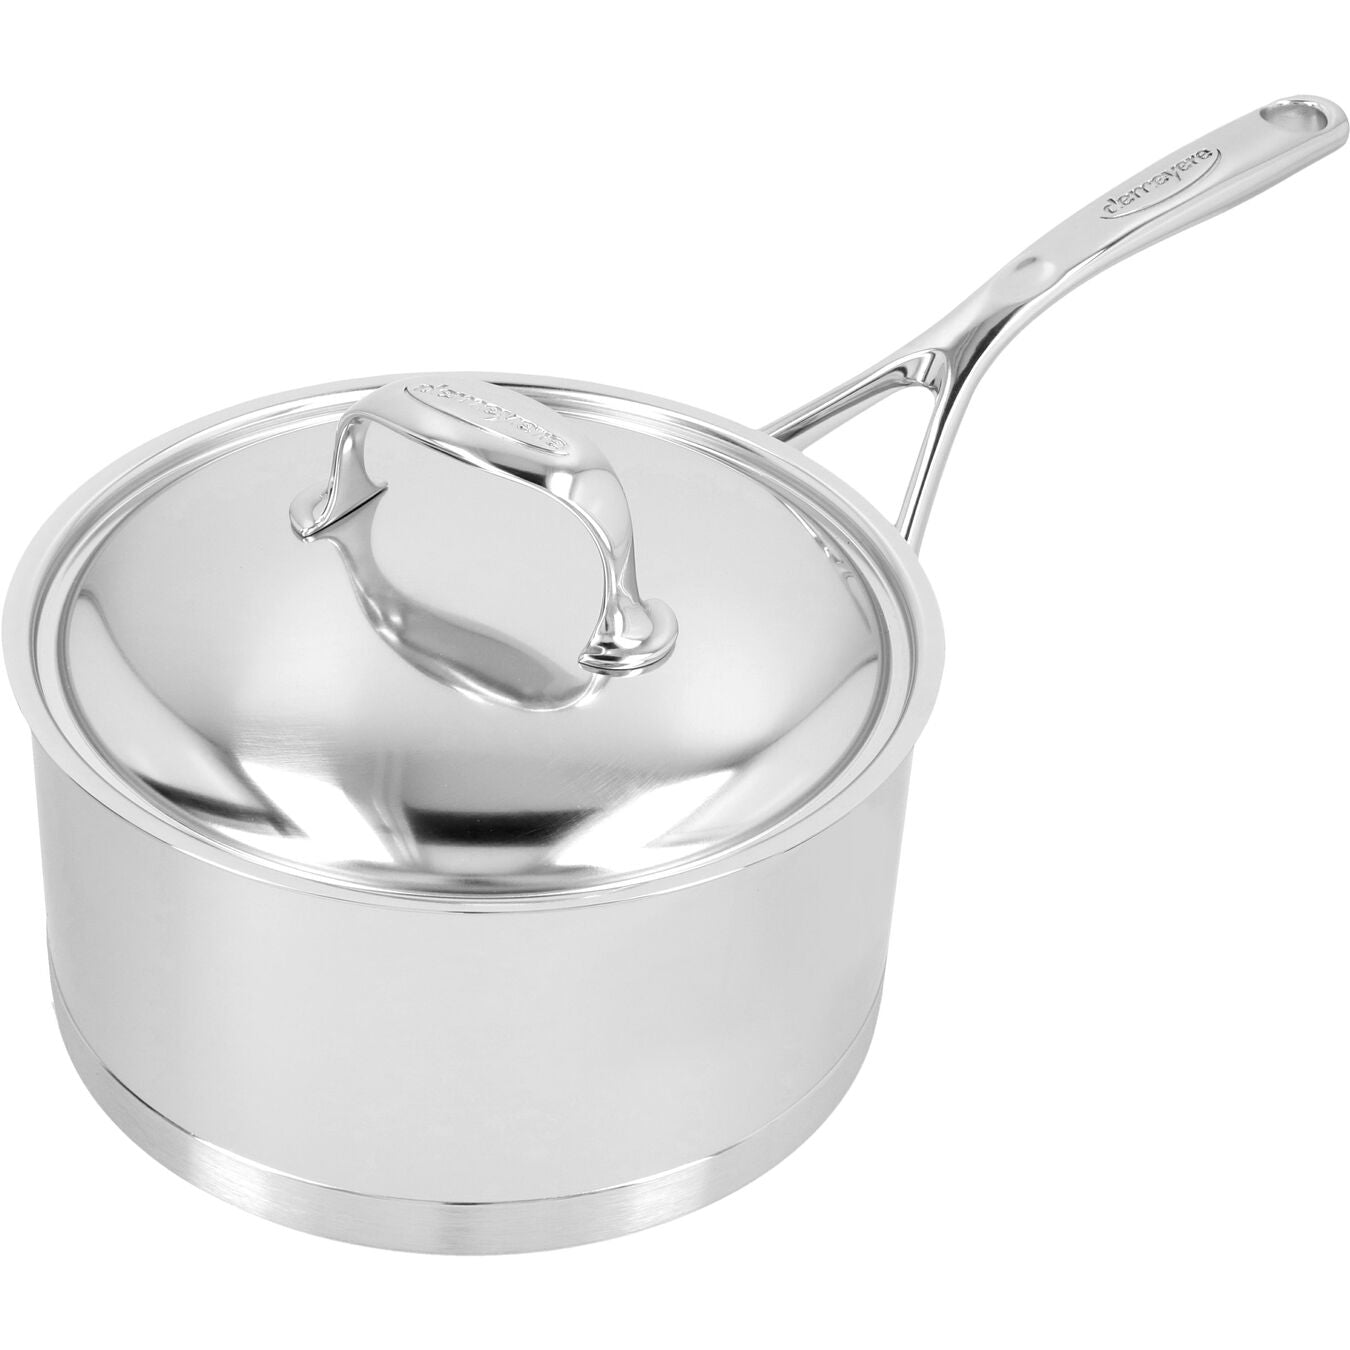 Demeyere Atlantis 7 Collection 2.2L 18/10 Stainless Steel Round Sauce Pan with Lid - CLEARANCE